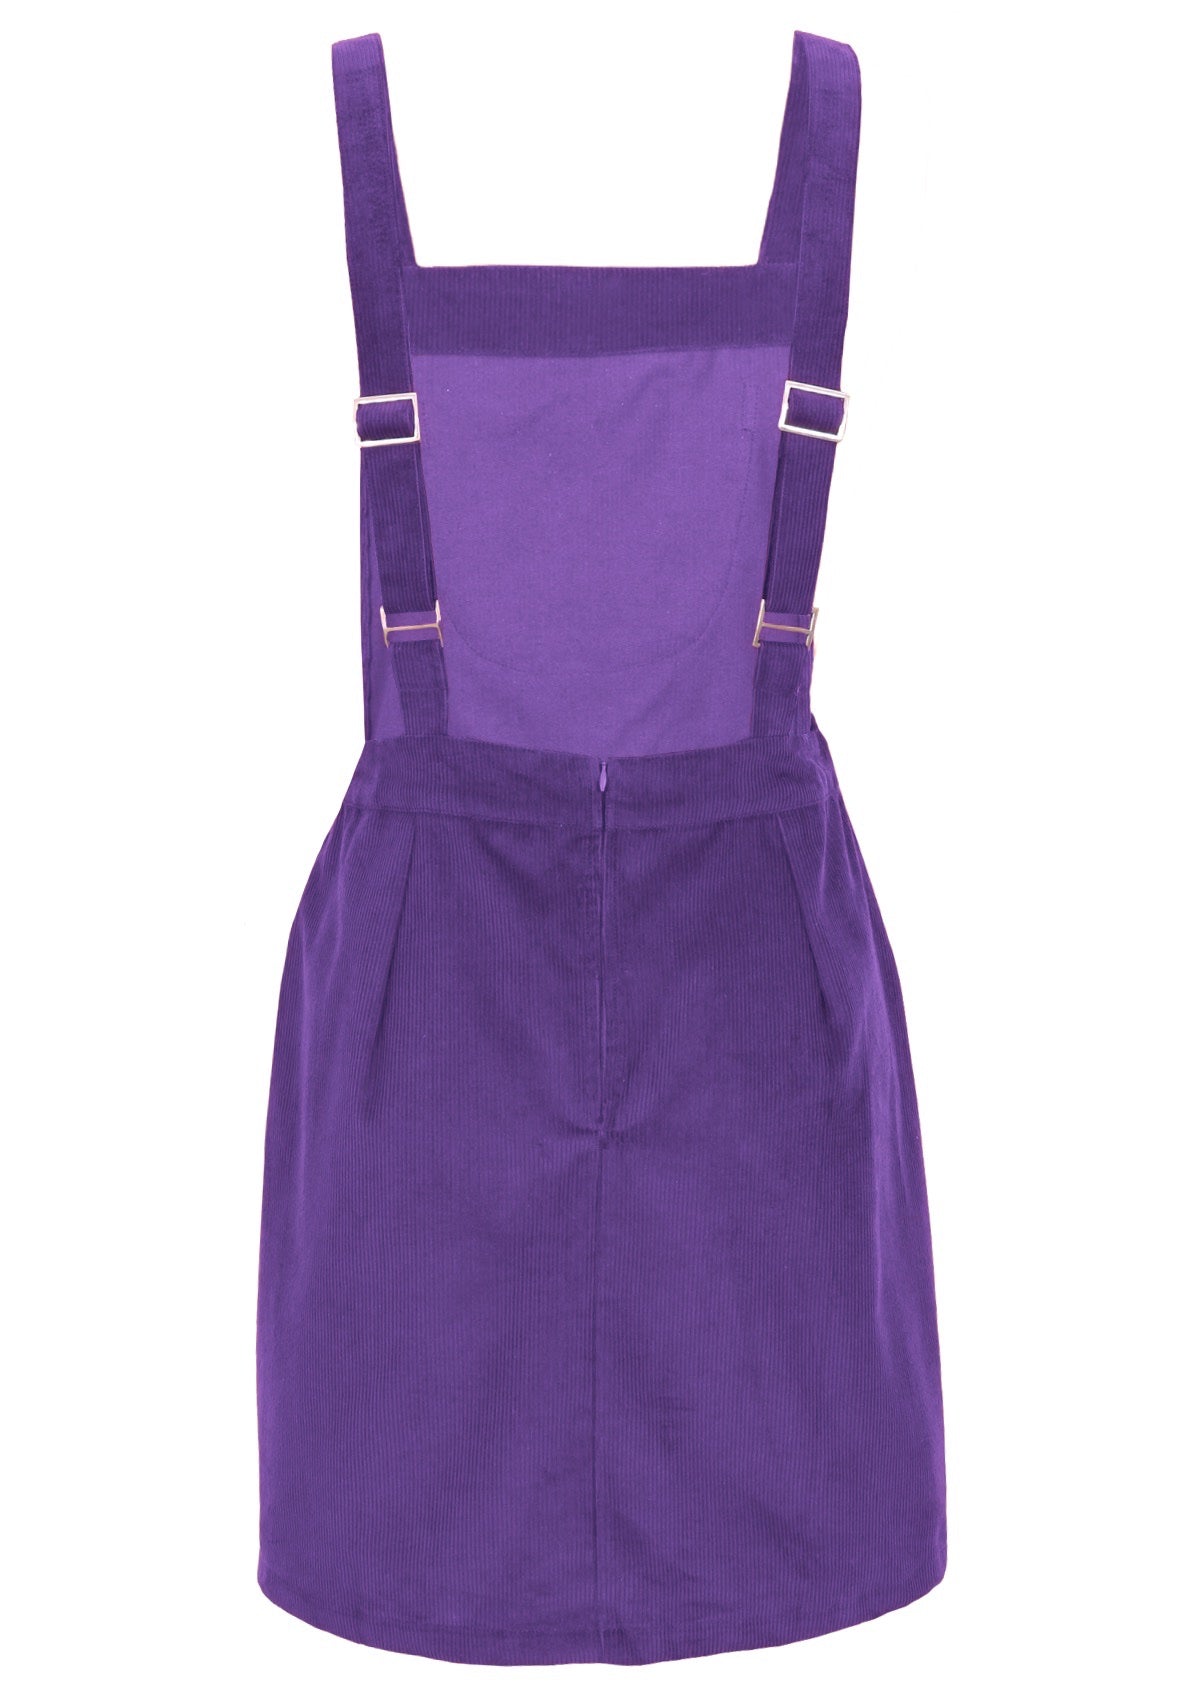 Pinafore in parachute purple has adjustable straps for the perfect fit